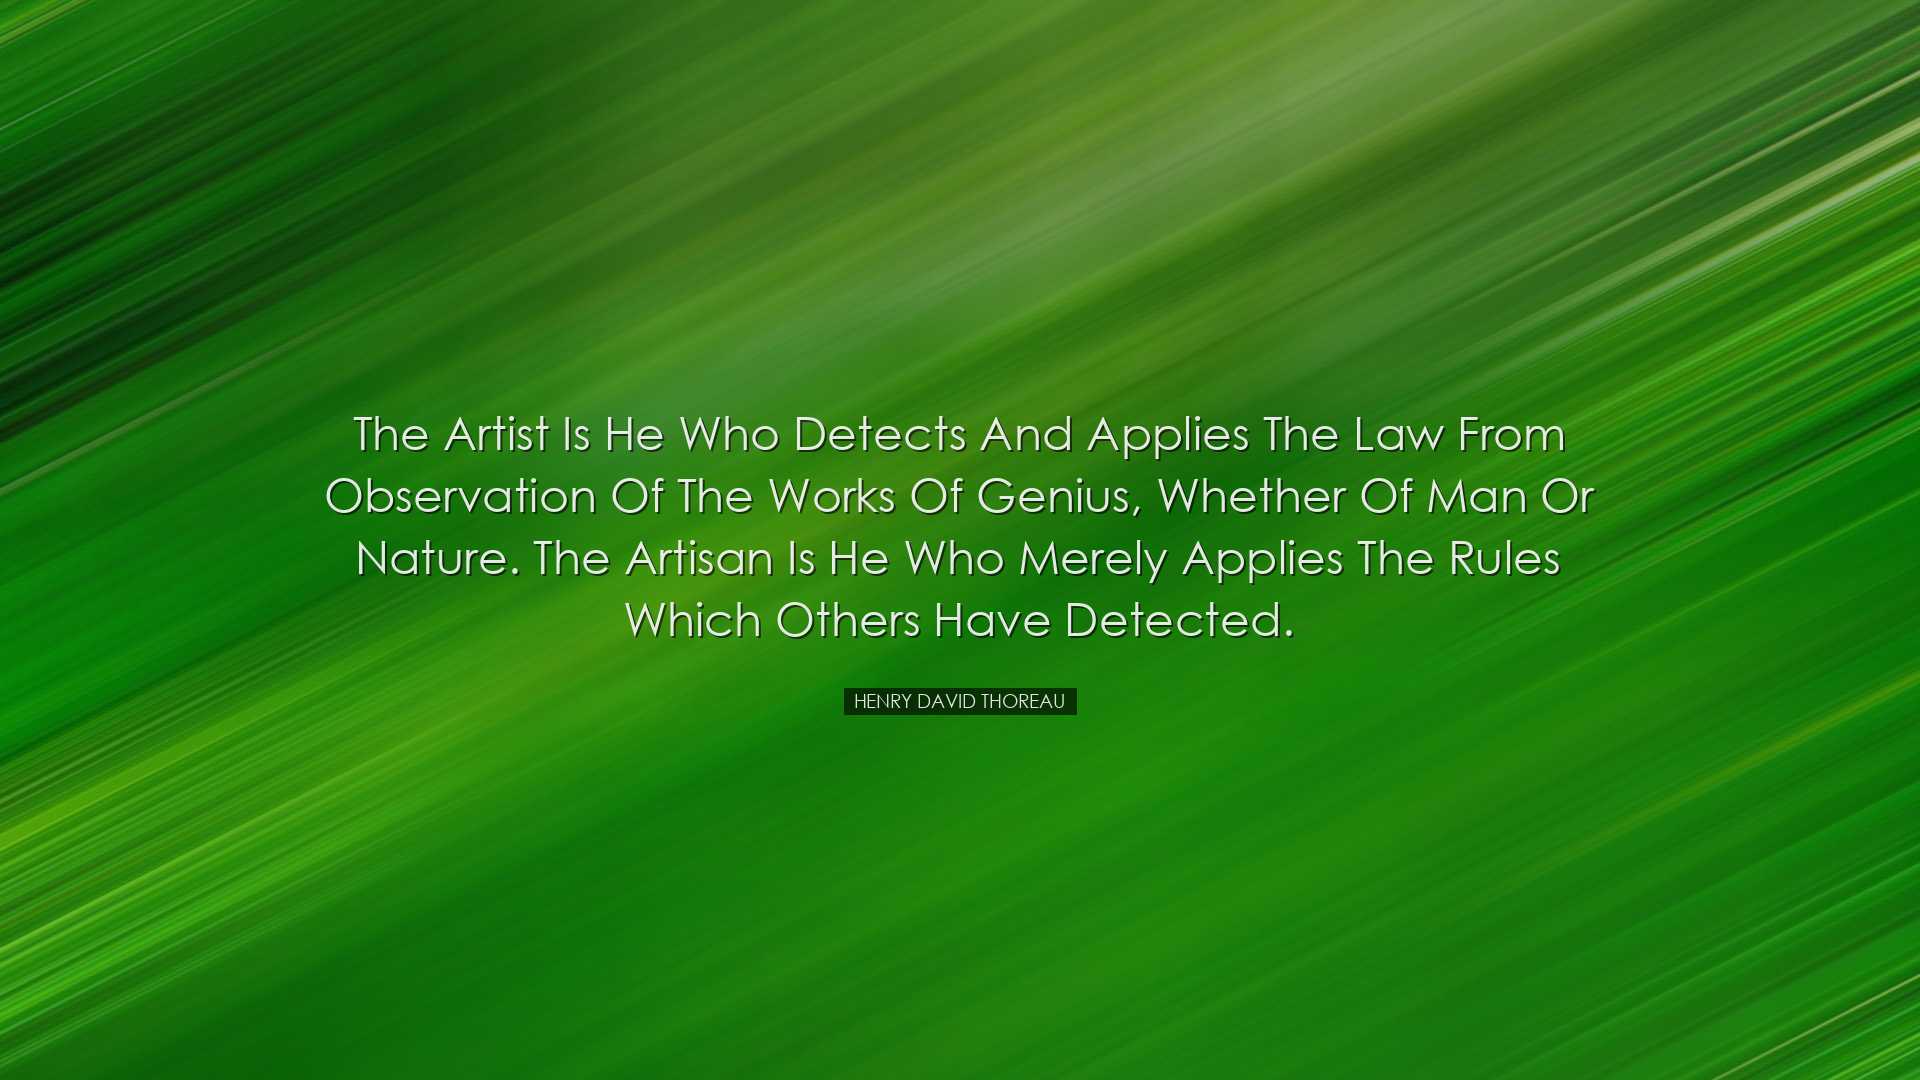 The Artist is he who detects and applies the law from observation